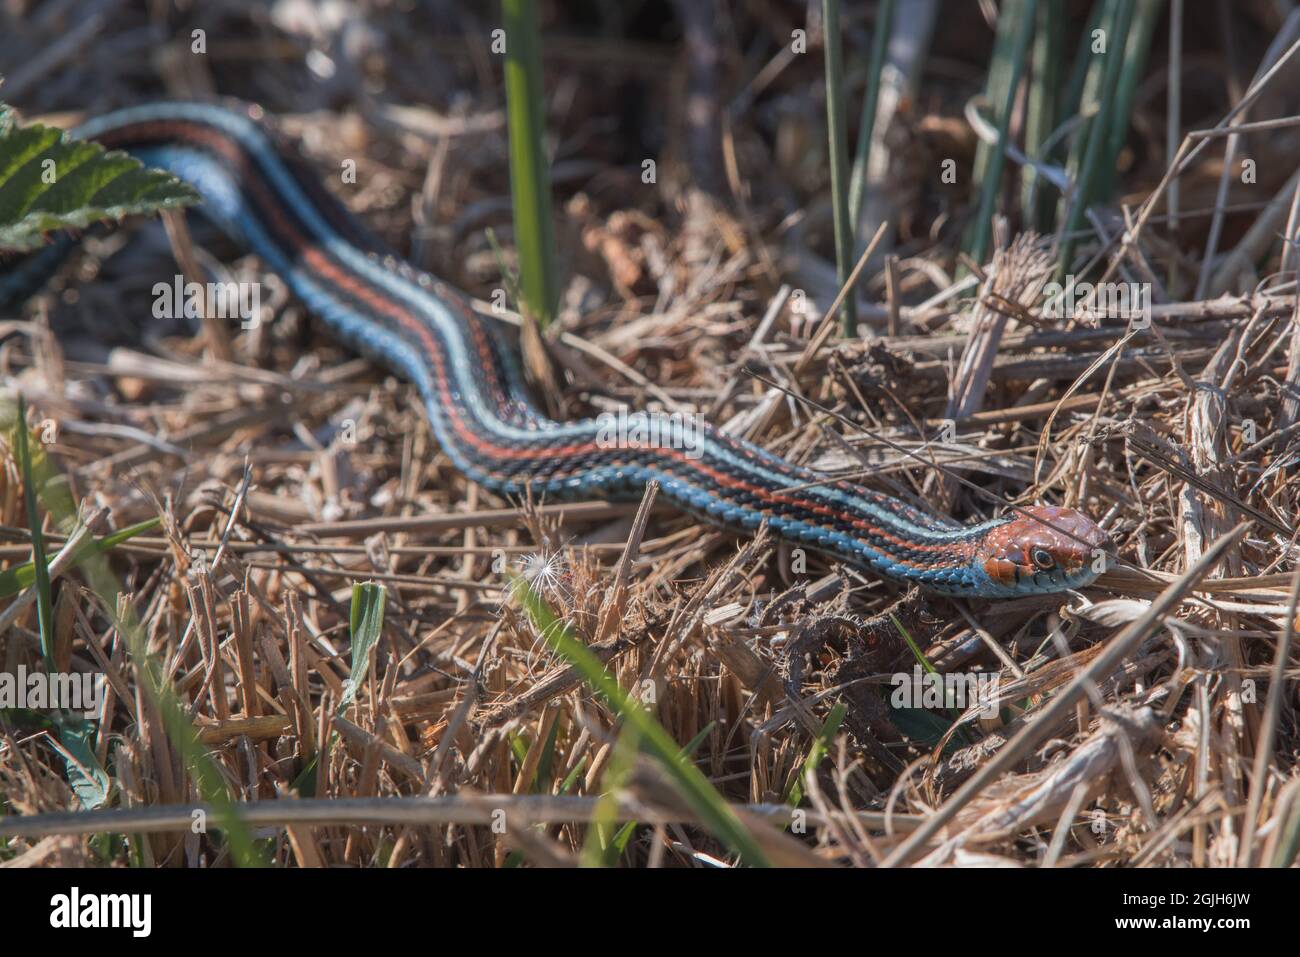 The endangered San Francisco garter snake (Thamnophis sirtalis tetrataenia) is considered one of the most beautiful snakes in the world. Stock Photo